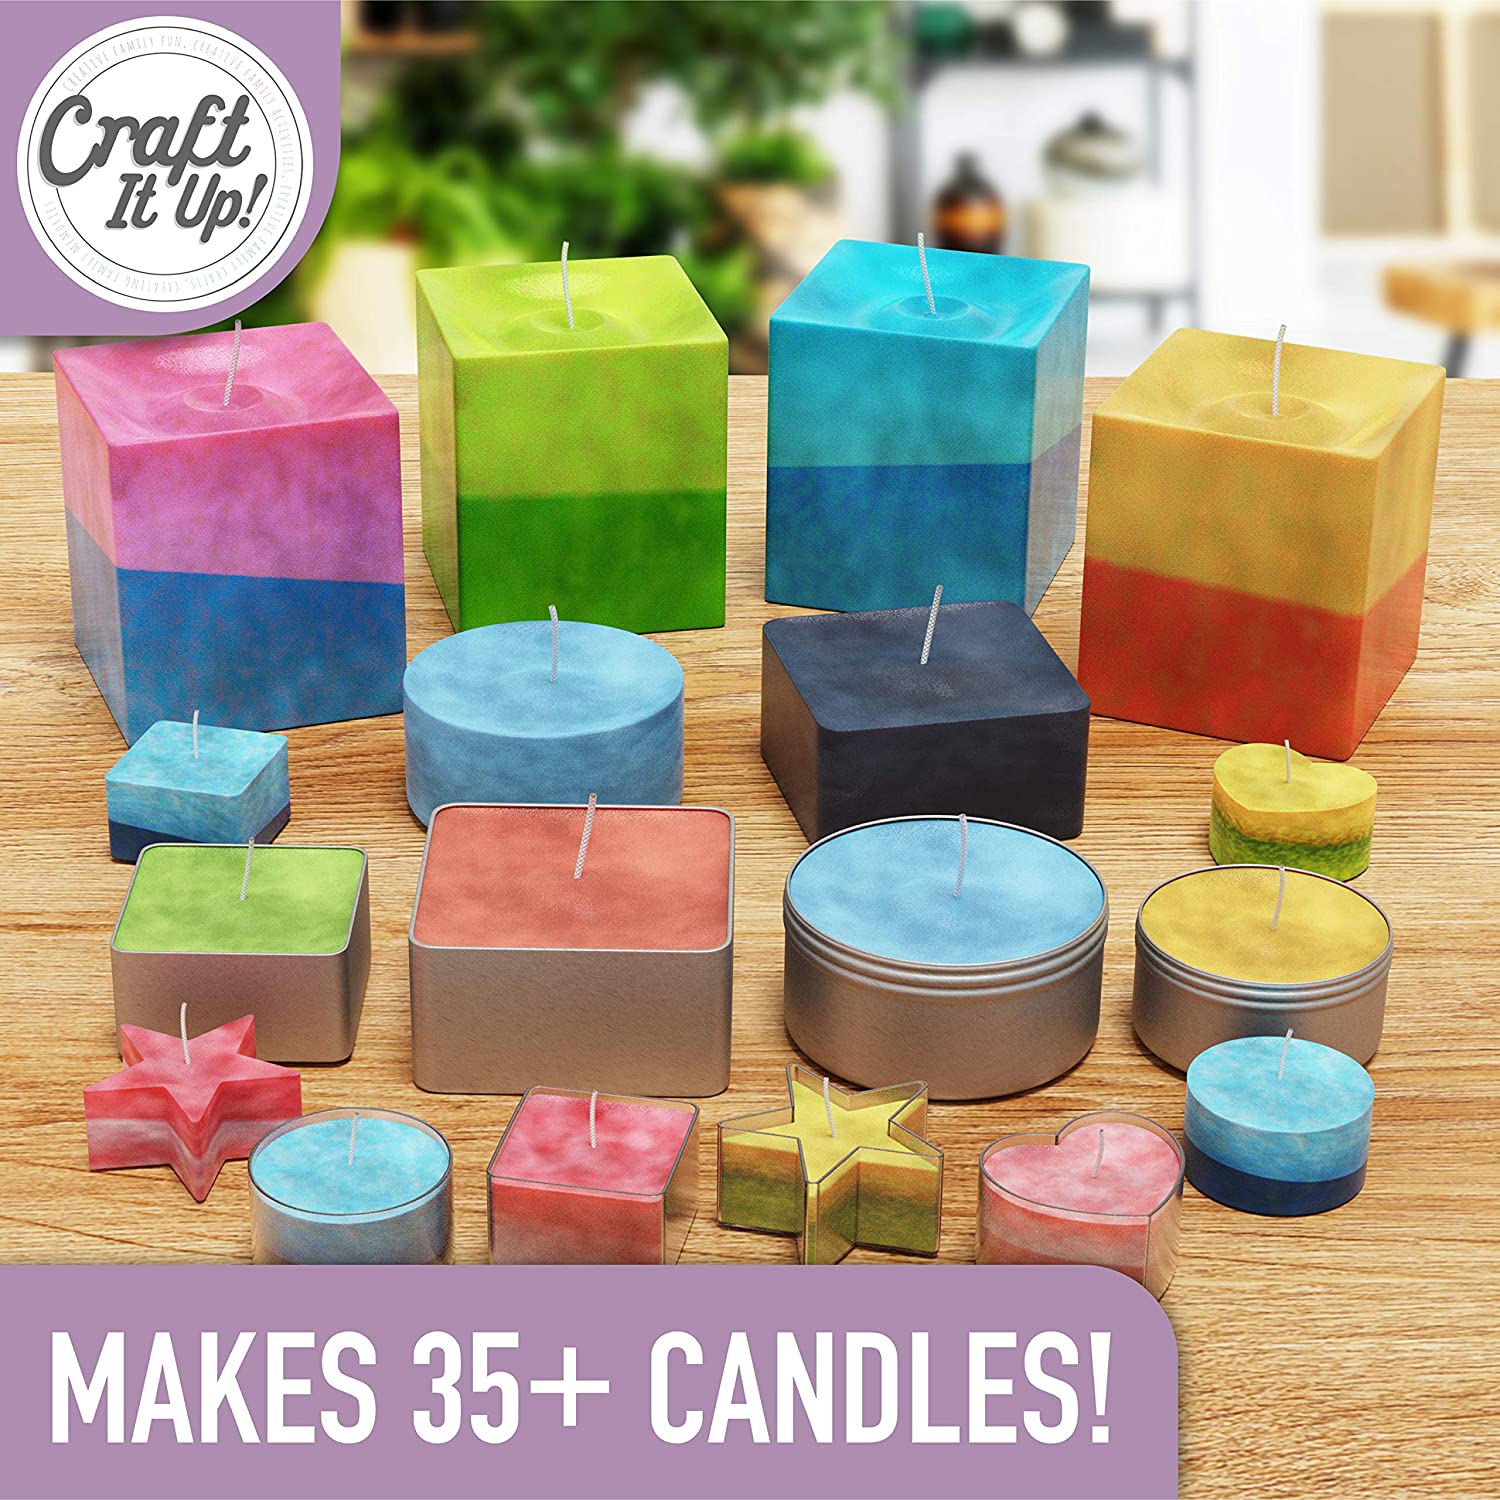 Candle Making Kit by Craft It Up! Complete DIY Beginners Set with Silicone Molds, Soy Candle Wax Supplies Plus Pot, Wicks, Essential Oils & More, Scented Homemade Candles Set for Teens & Adults - image 3 of 7